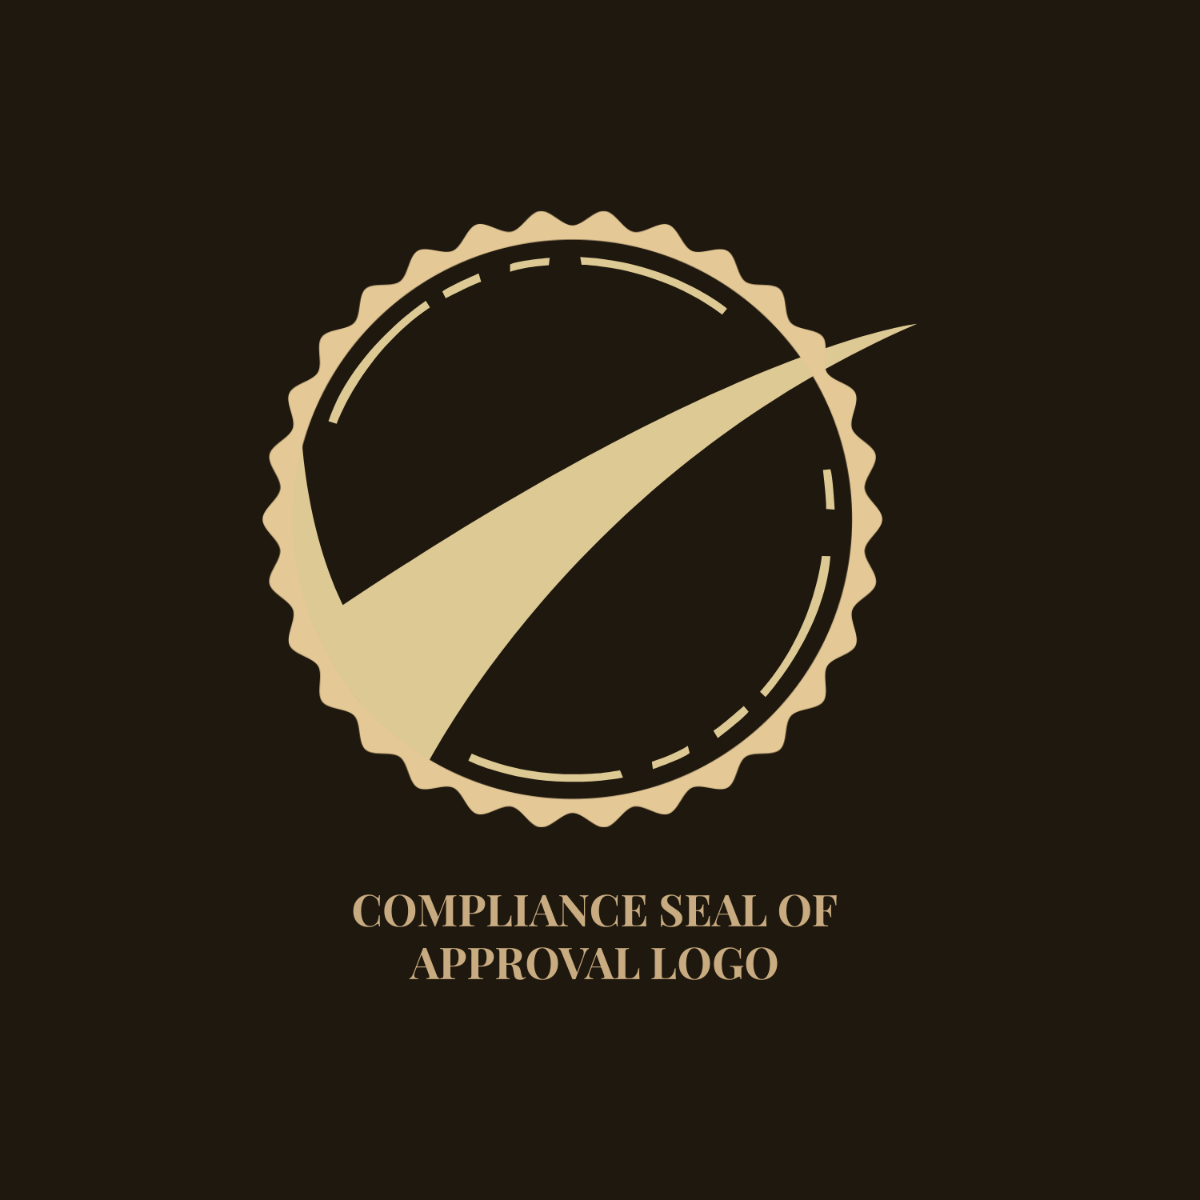 Compliance Seal of Approval Logo